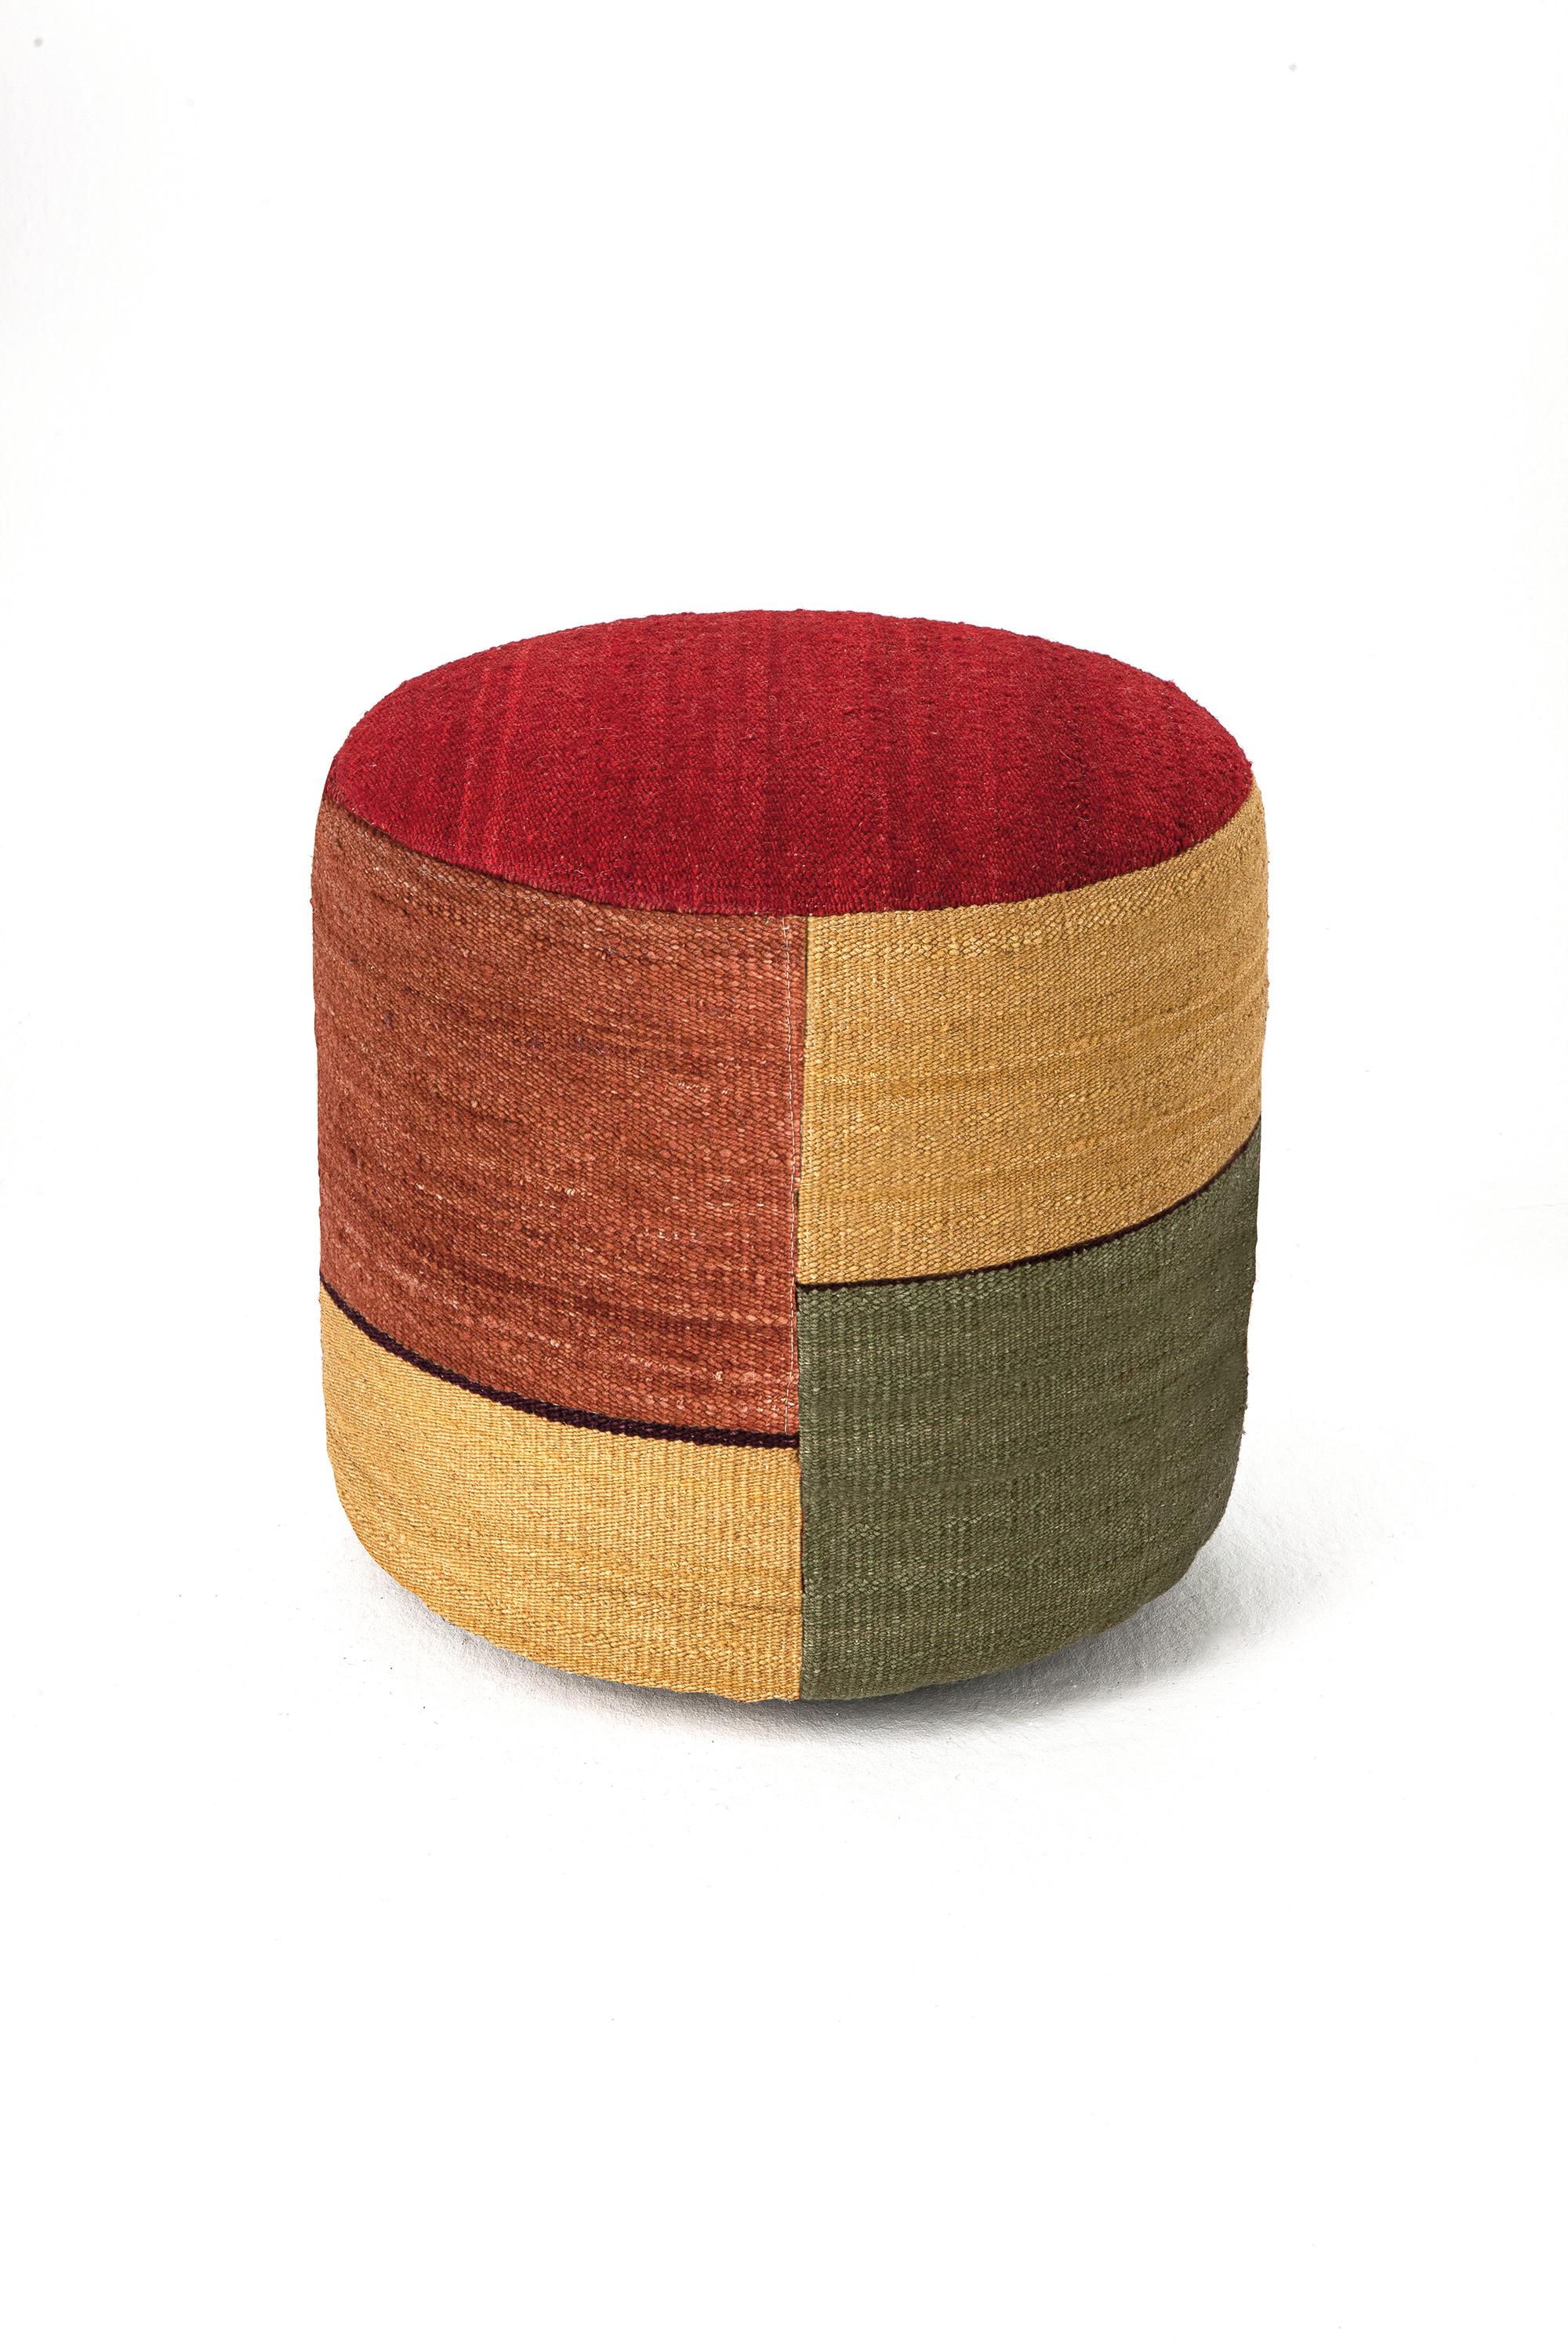 'Kilim 3' Pouf by Nani Marquina and Marcos Catalán for Nanimarquina For Sale 9